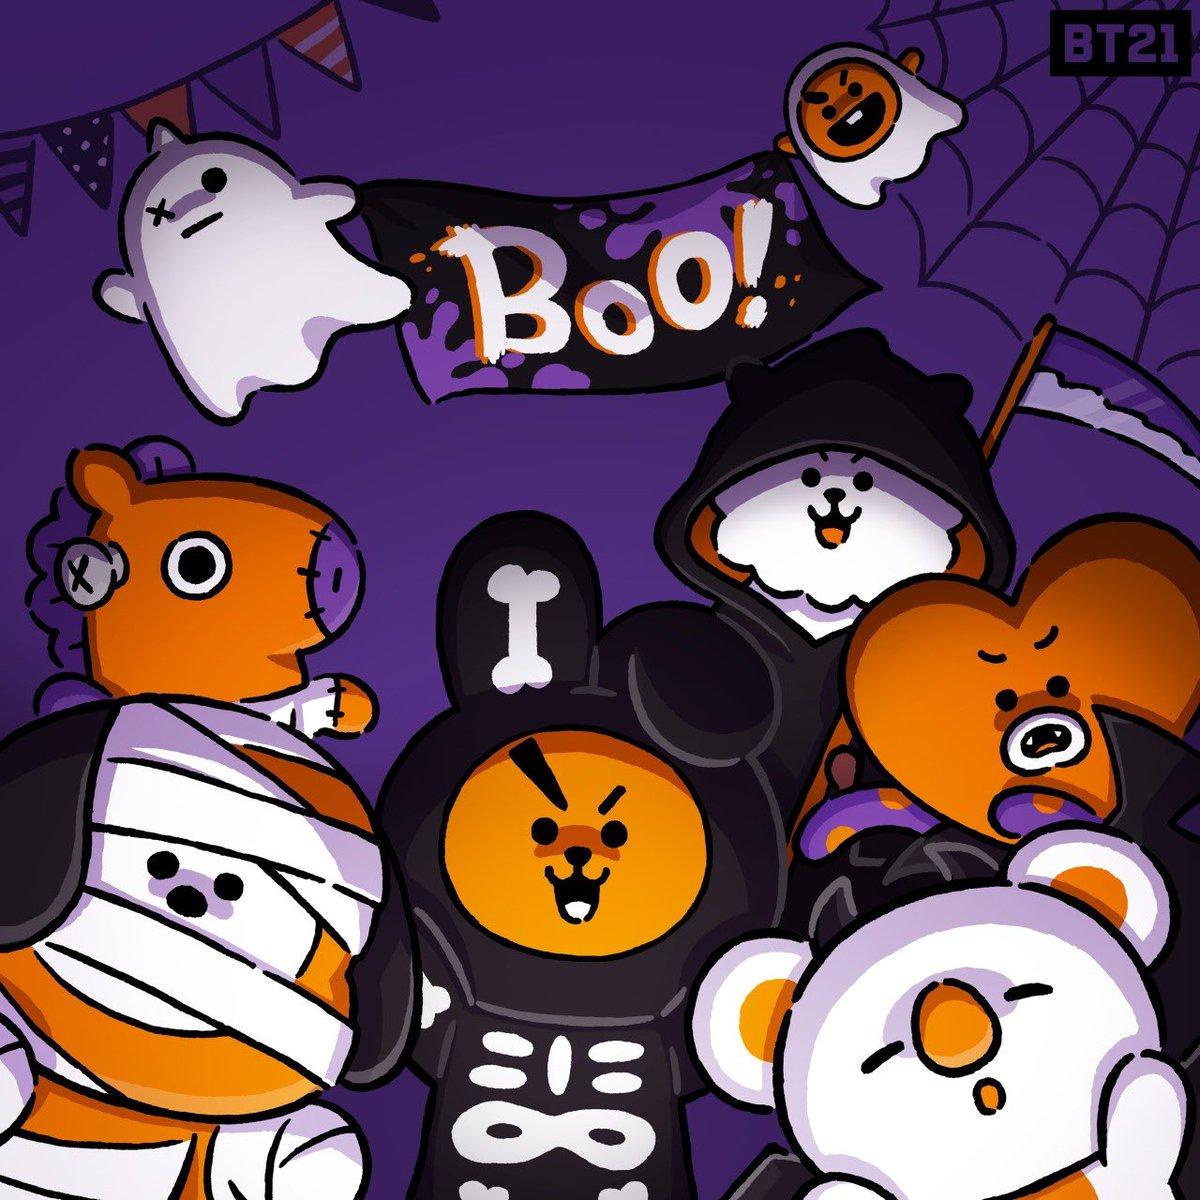 BT21's tweet the BOO crew for a frightfully good